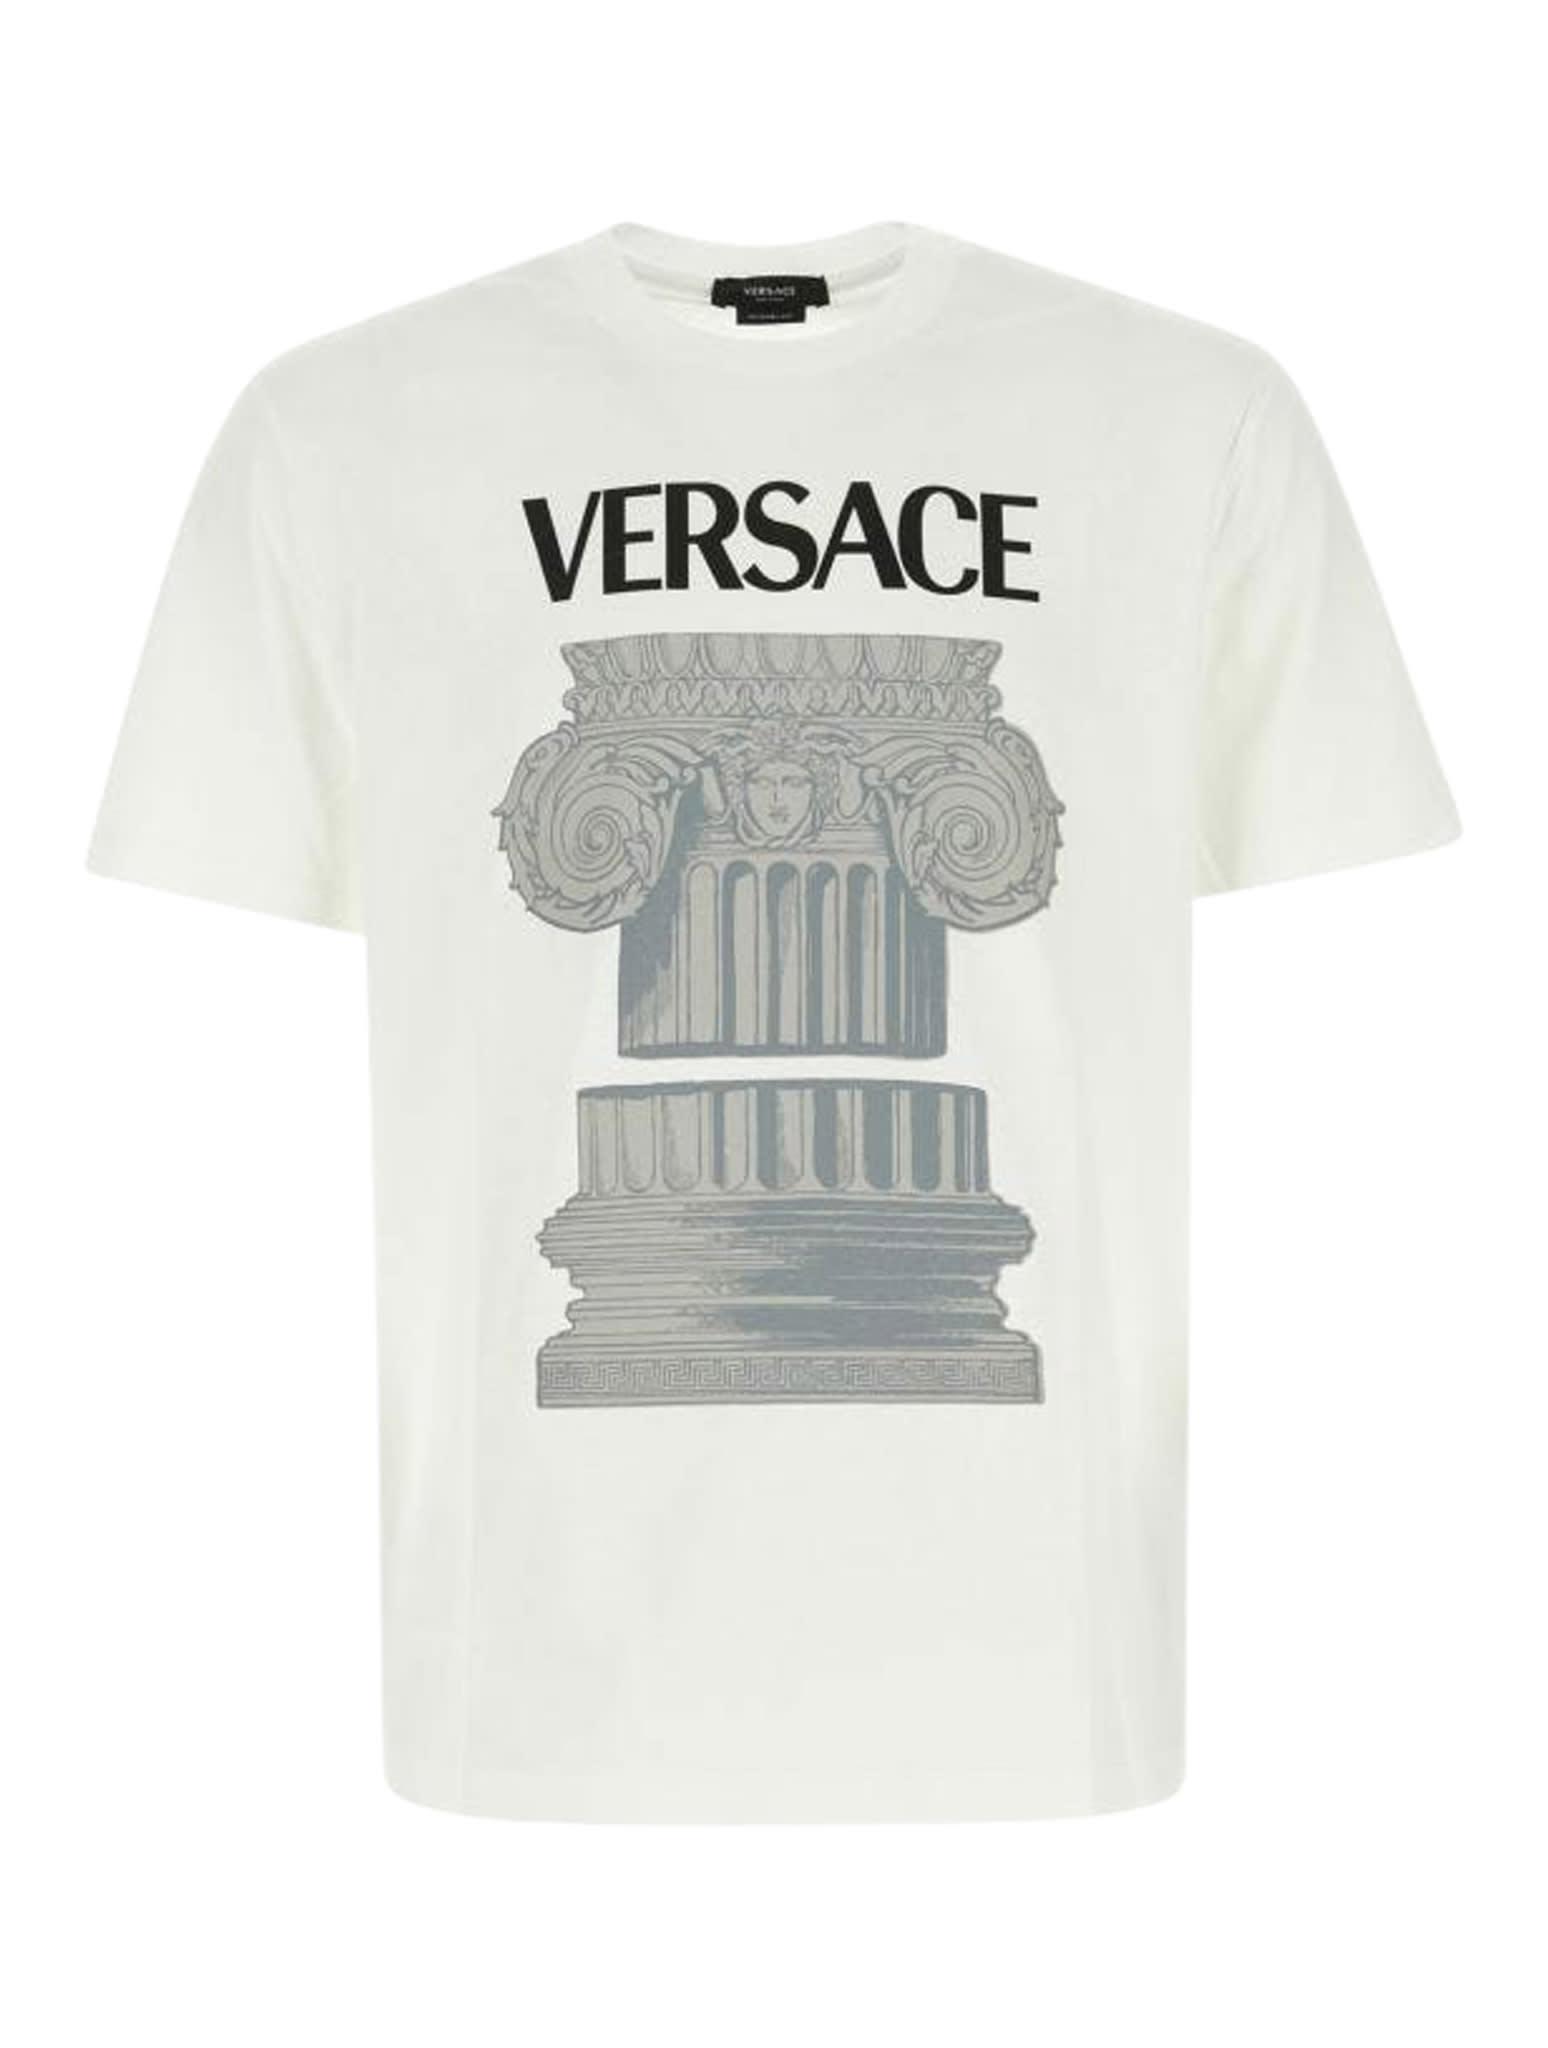 Versace T-shirt Compact Cotton Jersey Fabric + The Column Print in